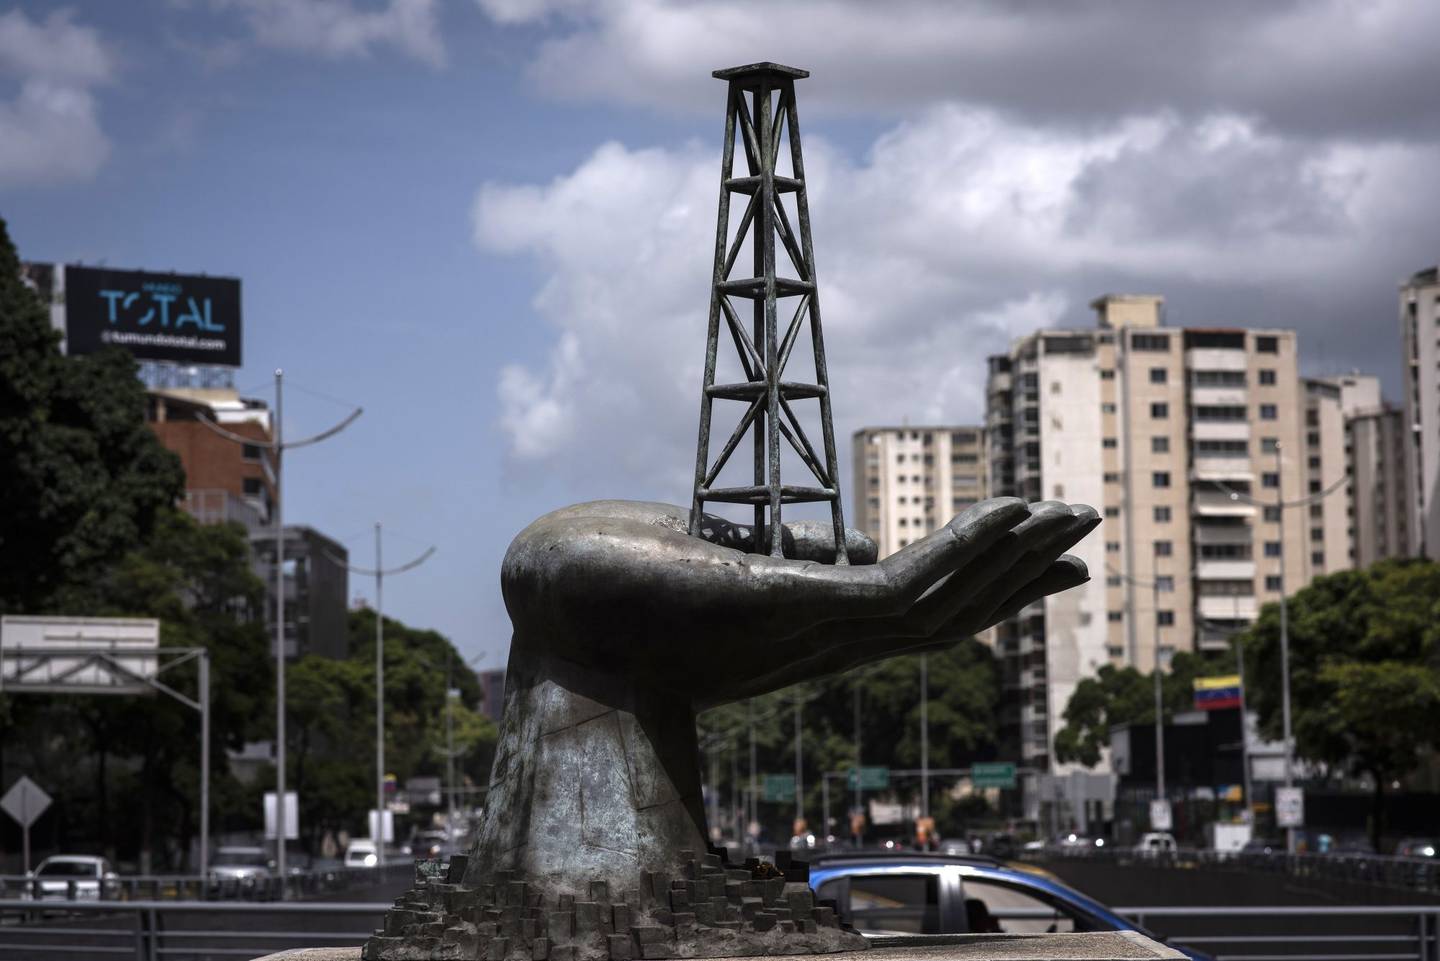 A sculpture, depicting an oil derrick in a hand, outside the Petroleos de Venezuela SA (PDVSA) headquarters in Caracas, Venezuela, on Wednesday, Aug. 31, 2022. Venezuelan Oil Minister El Aissami made a request through the prosecutor's office for the extradition of ex-minister, Rafael Ramirez, for allegedly defrauding state oil company PDVSA.